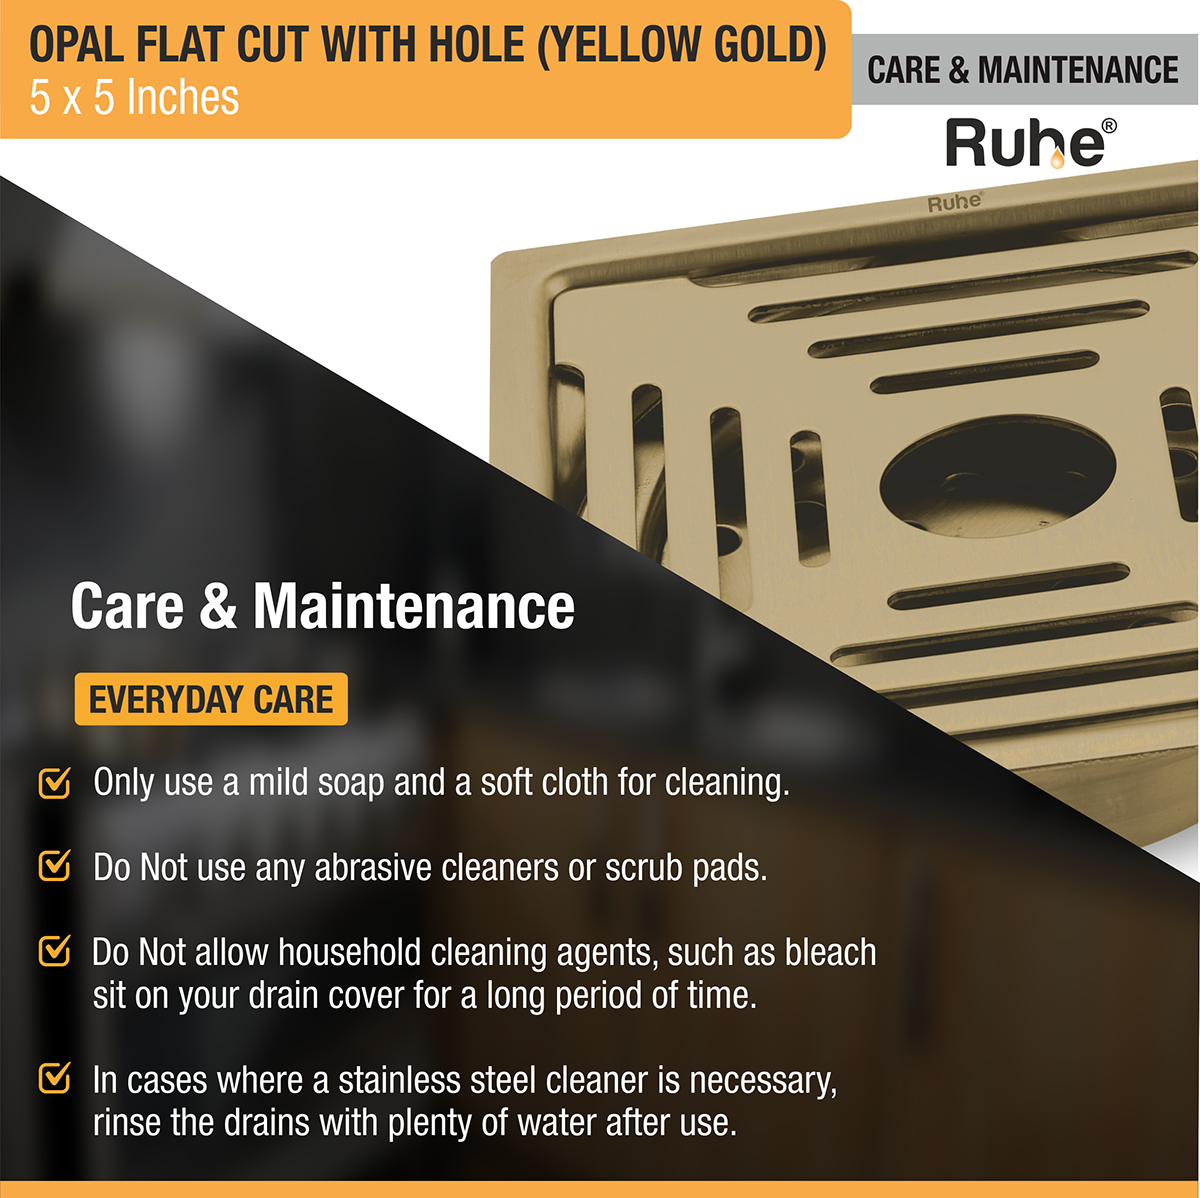 Opal Square Flat Cut Floor Drain in Yellow Gold PVD Coating (5 x 5 Inches) with Hole care and maintenance